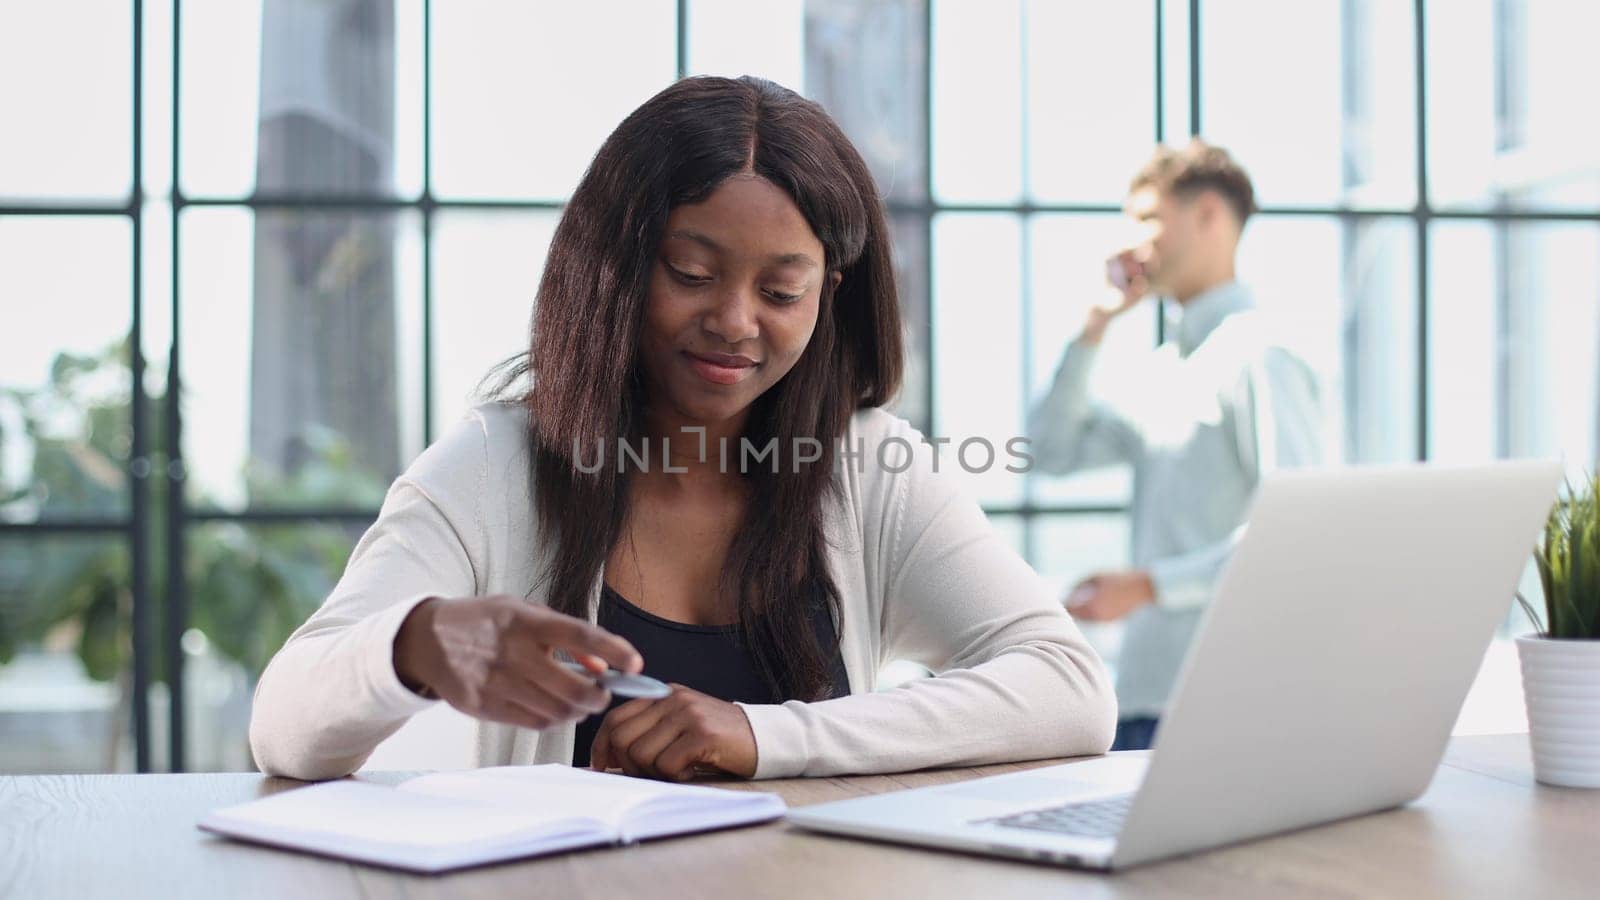 female employee or a businesswoman using a laptop in a modern office by Prosto